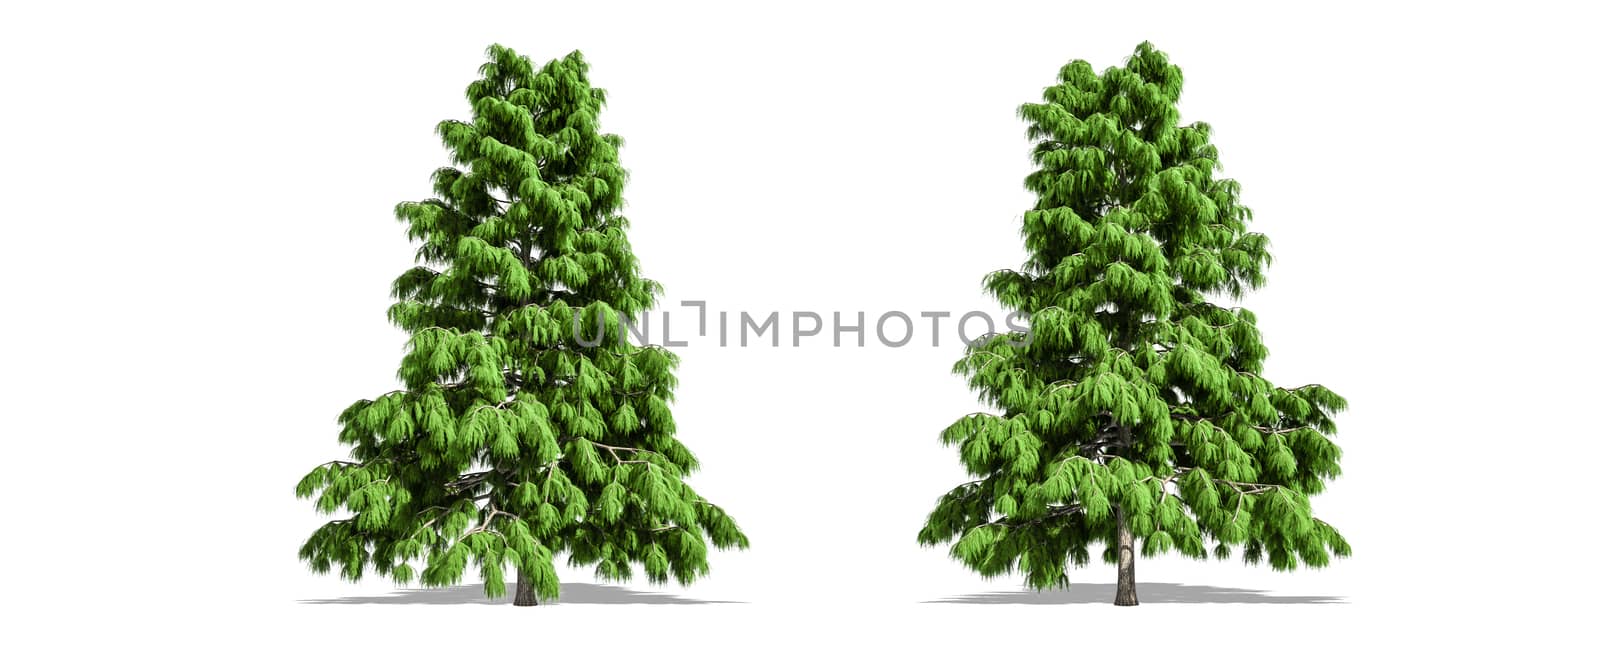 Beautiful Cedrus deodara tree isolated and cutting on a white background with clipping path.